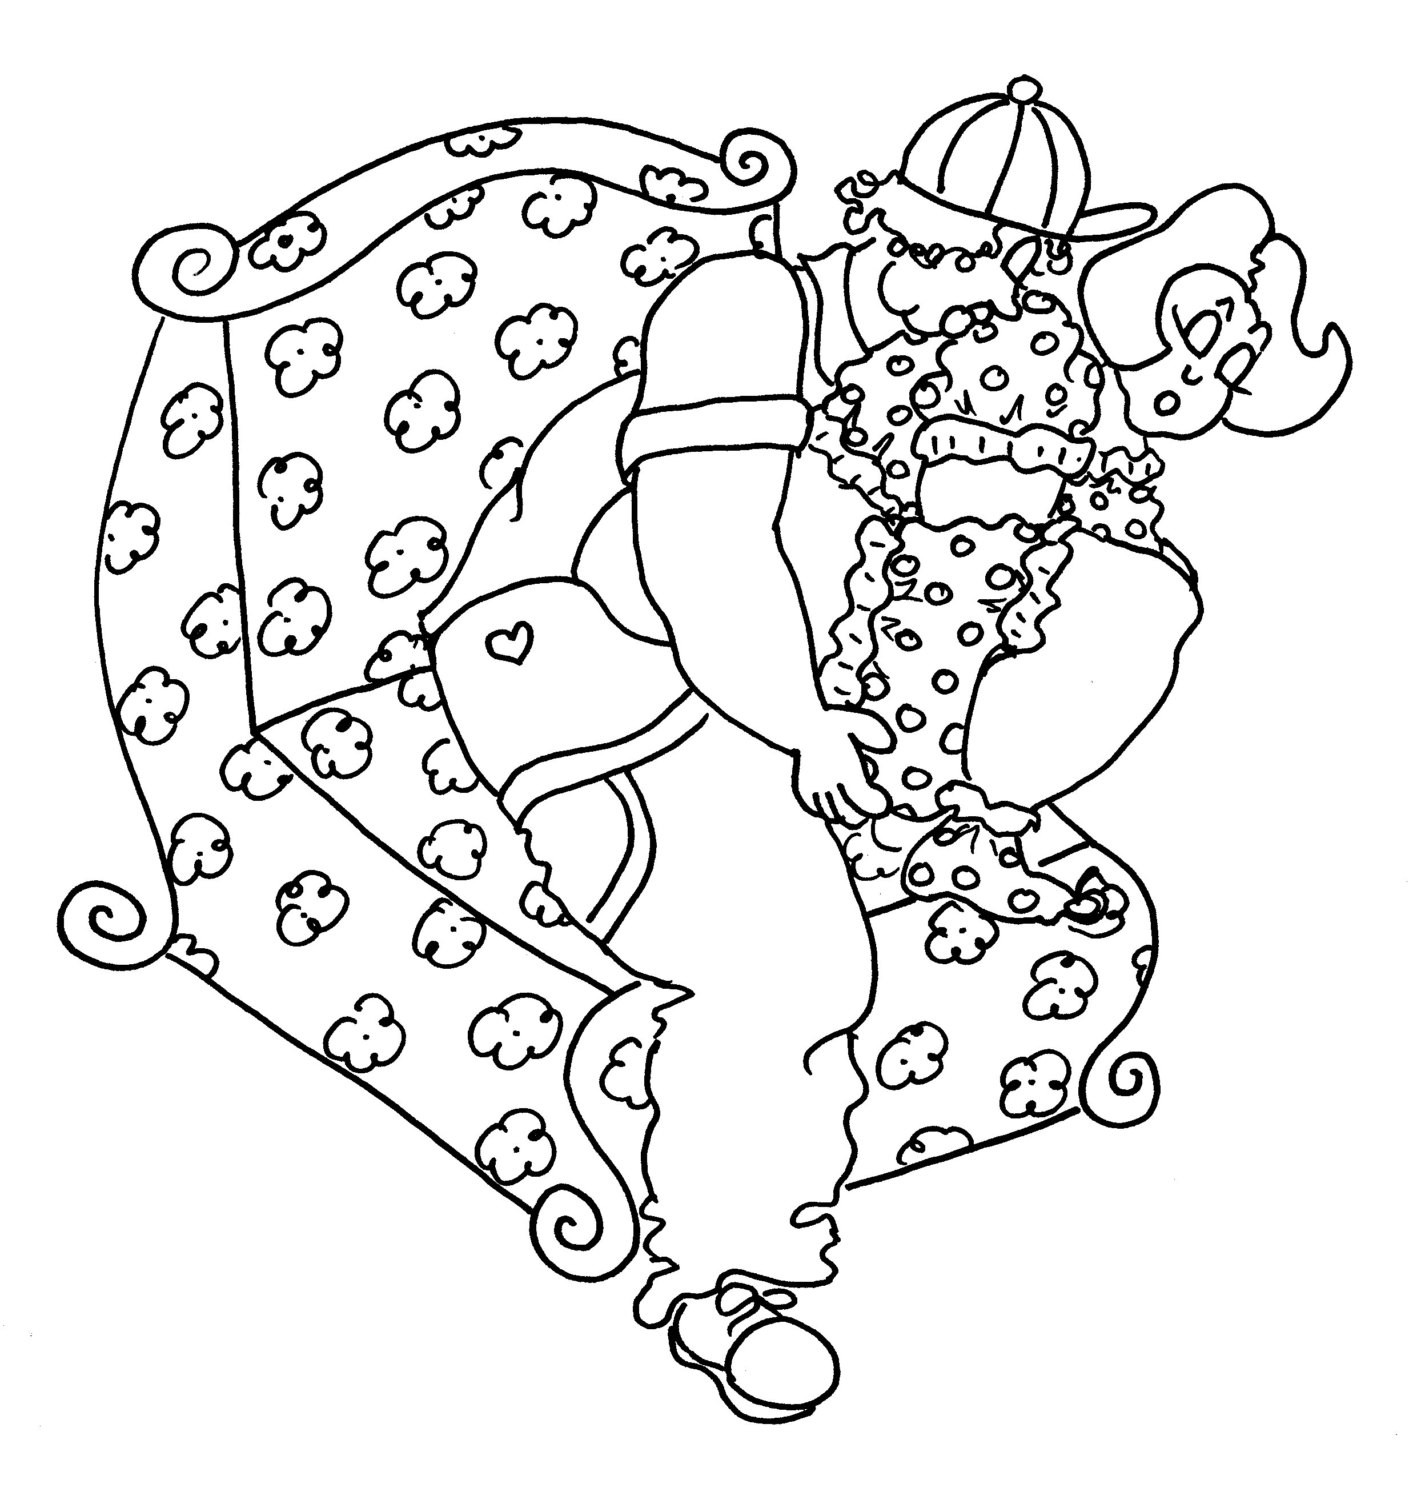 Funny Coloring Pages For Adults
 The Frog Funny y Coloring Pages for Adults from the